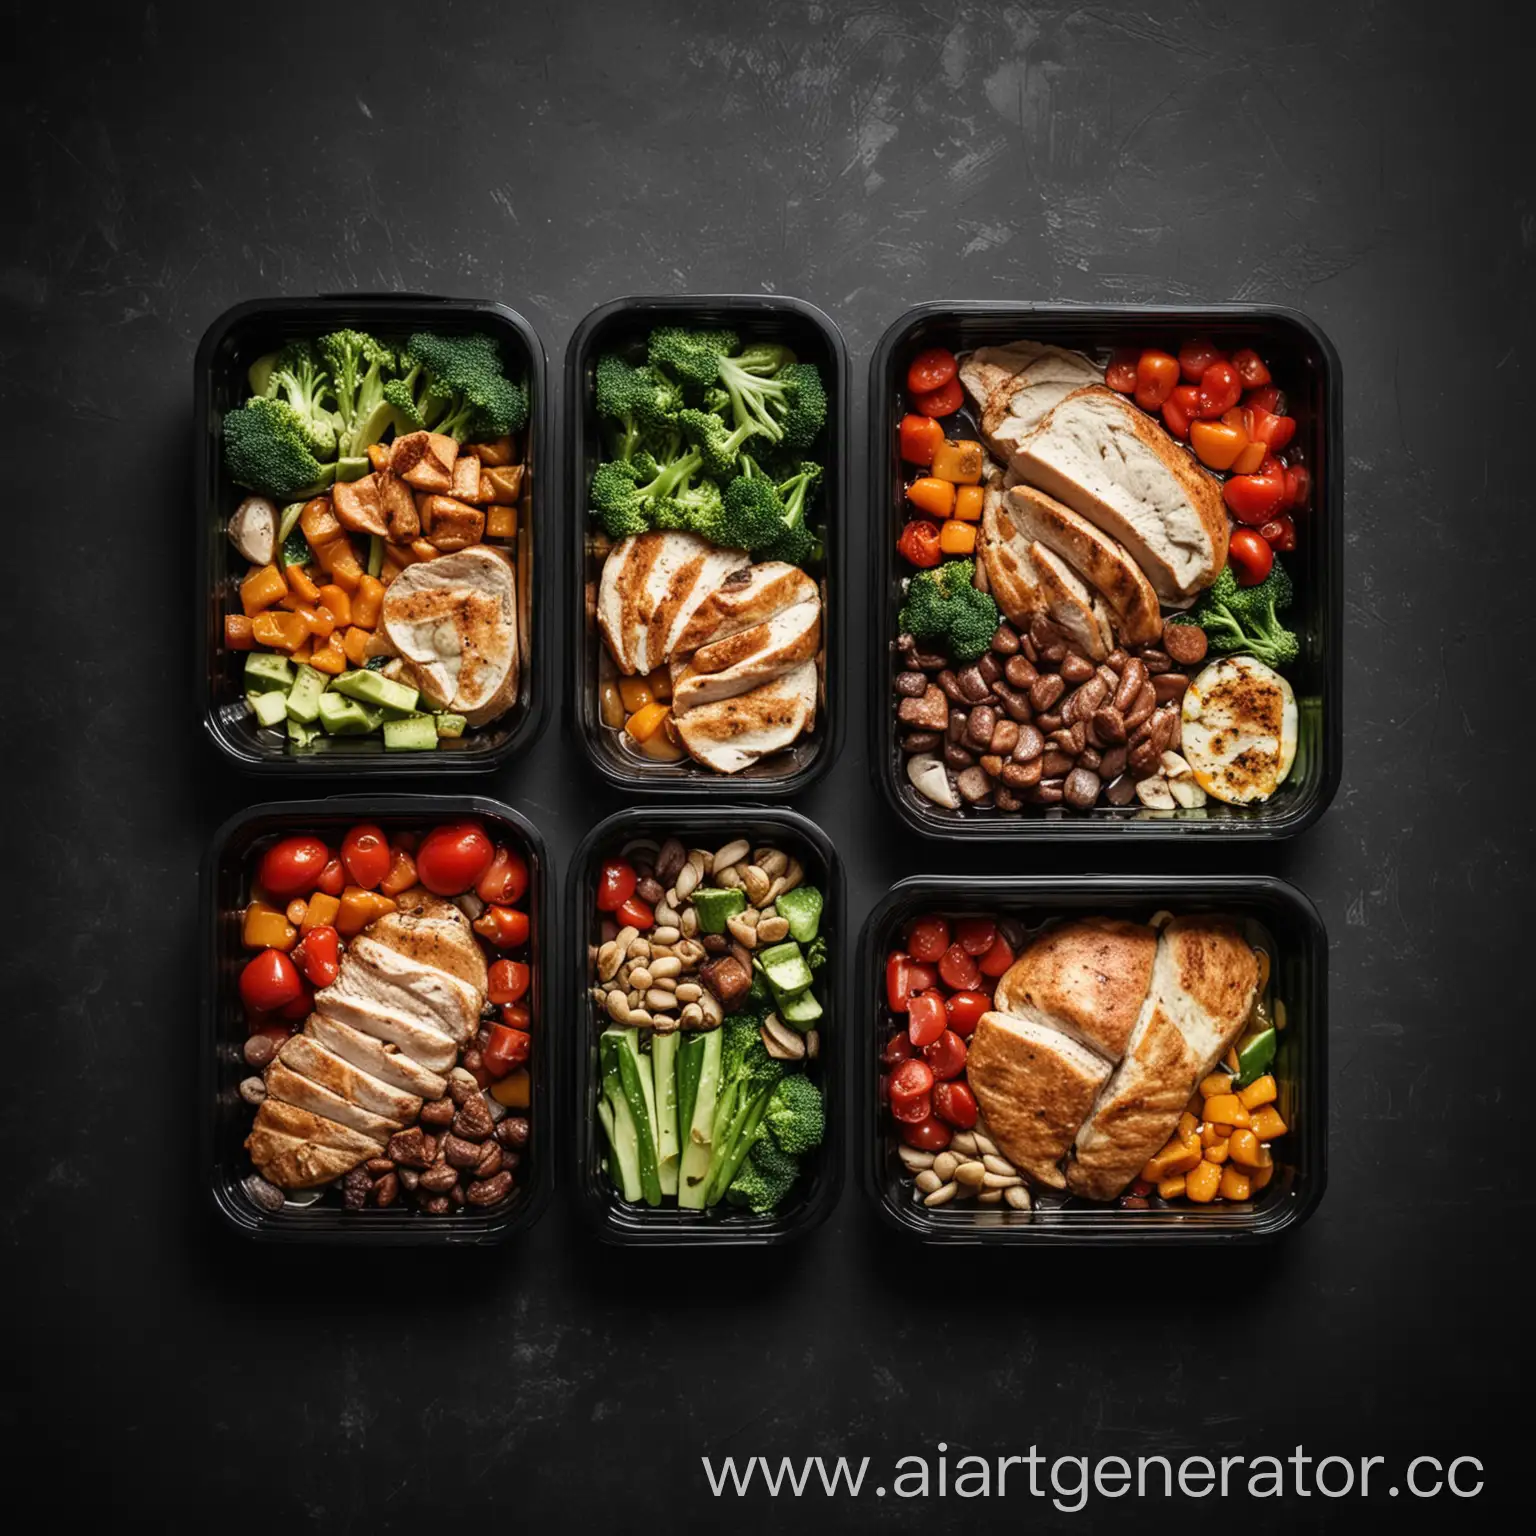 Proper-Nutrition-Meal-in-Black-Containers-on-Dark-Table